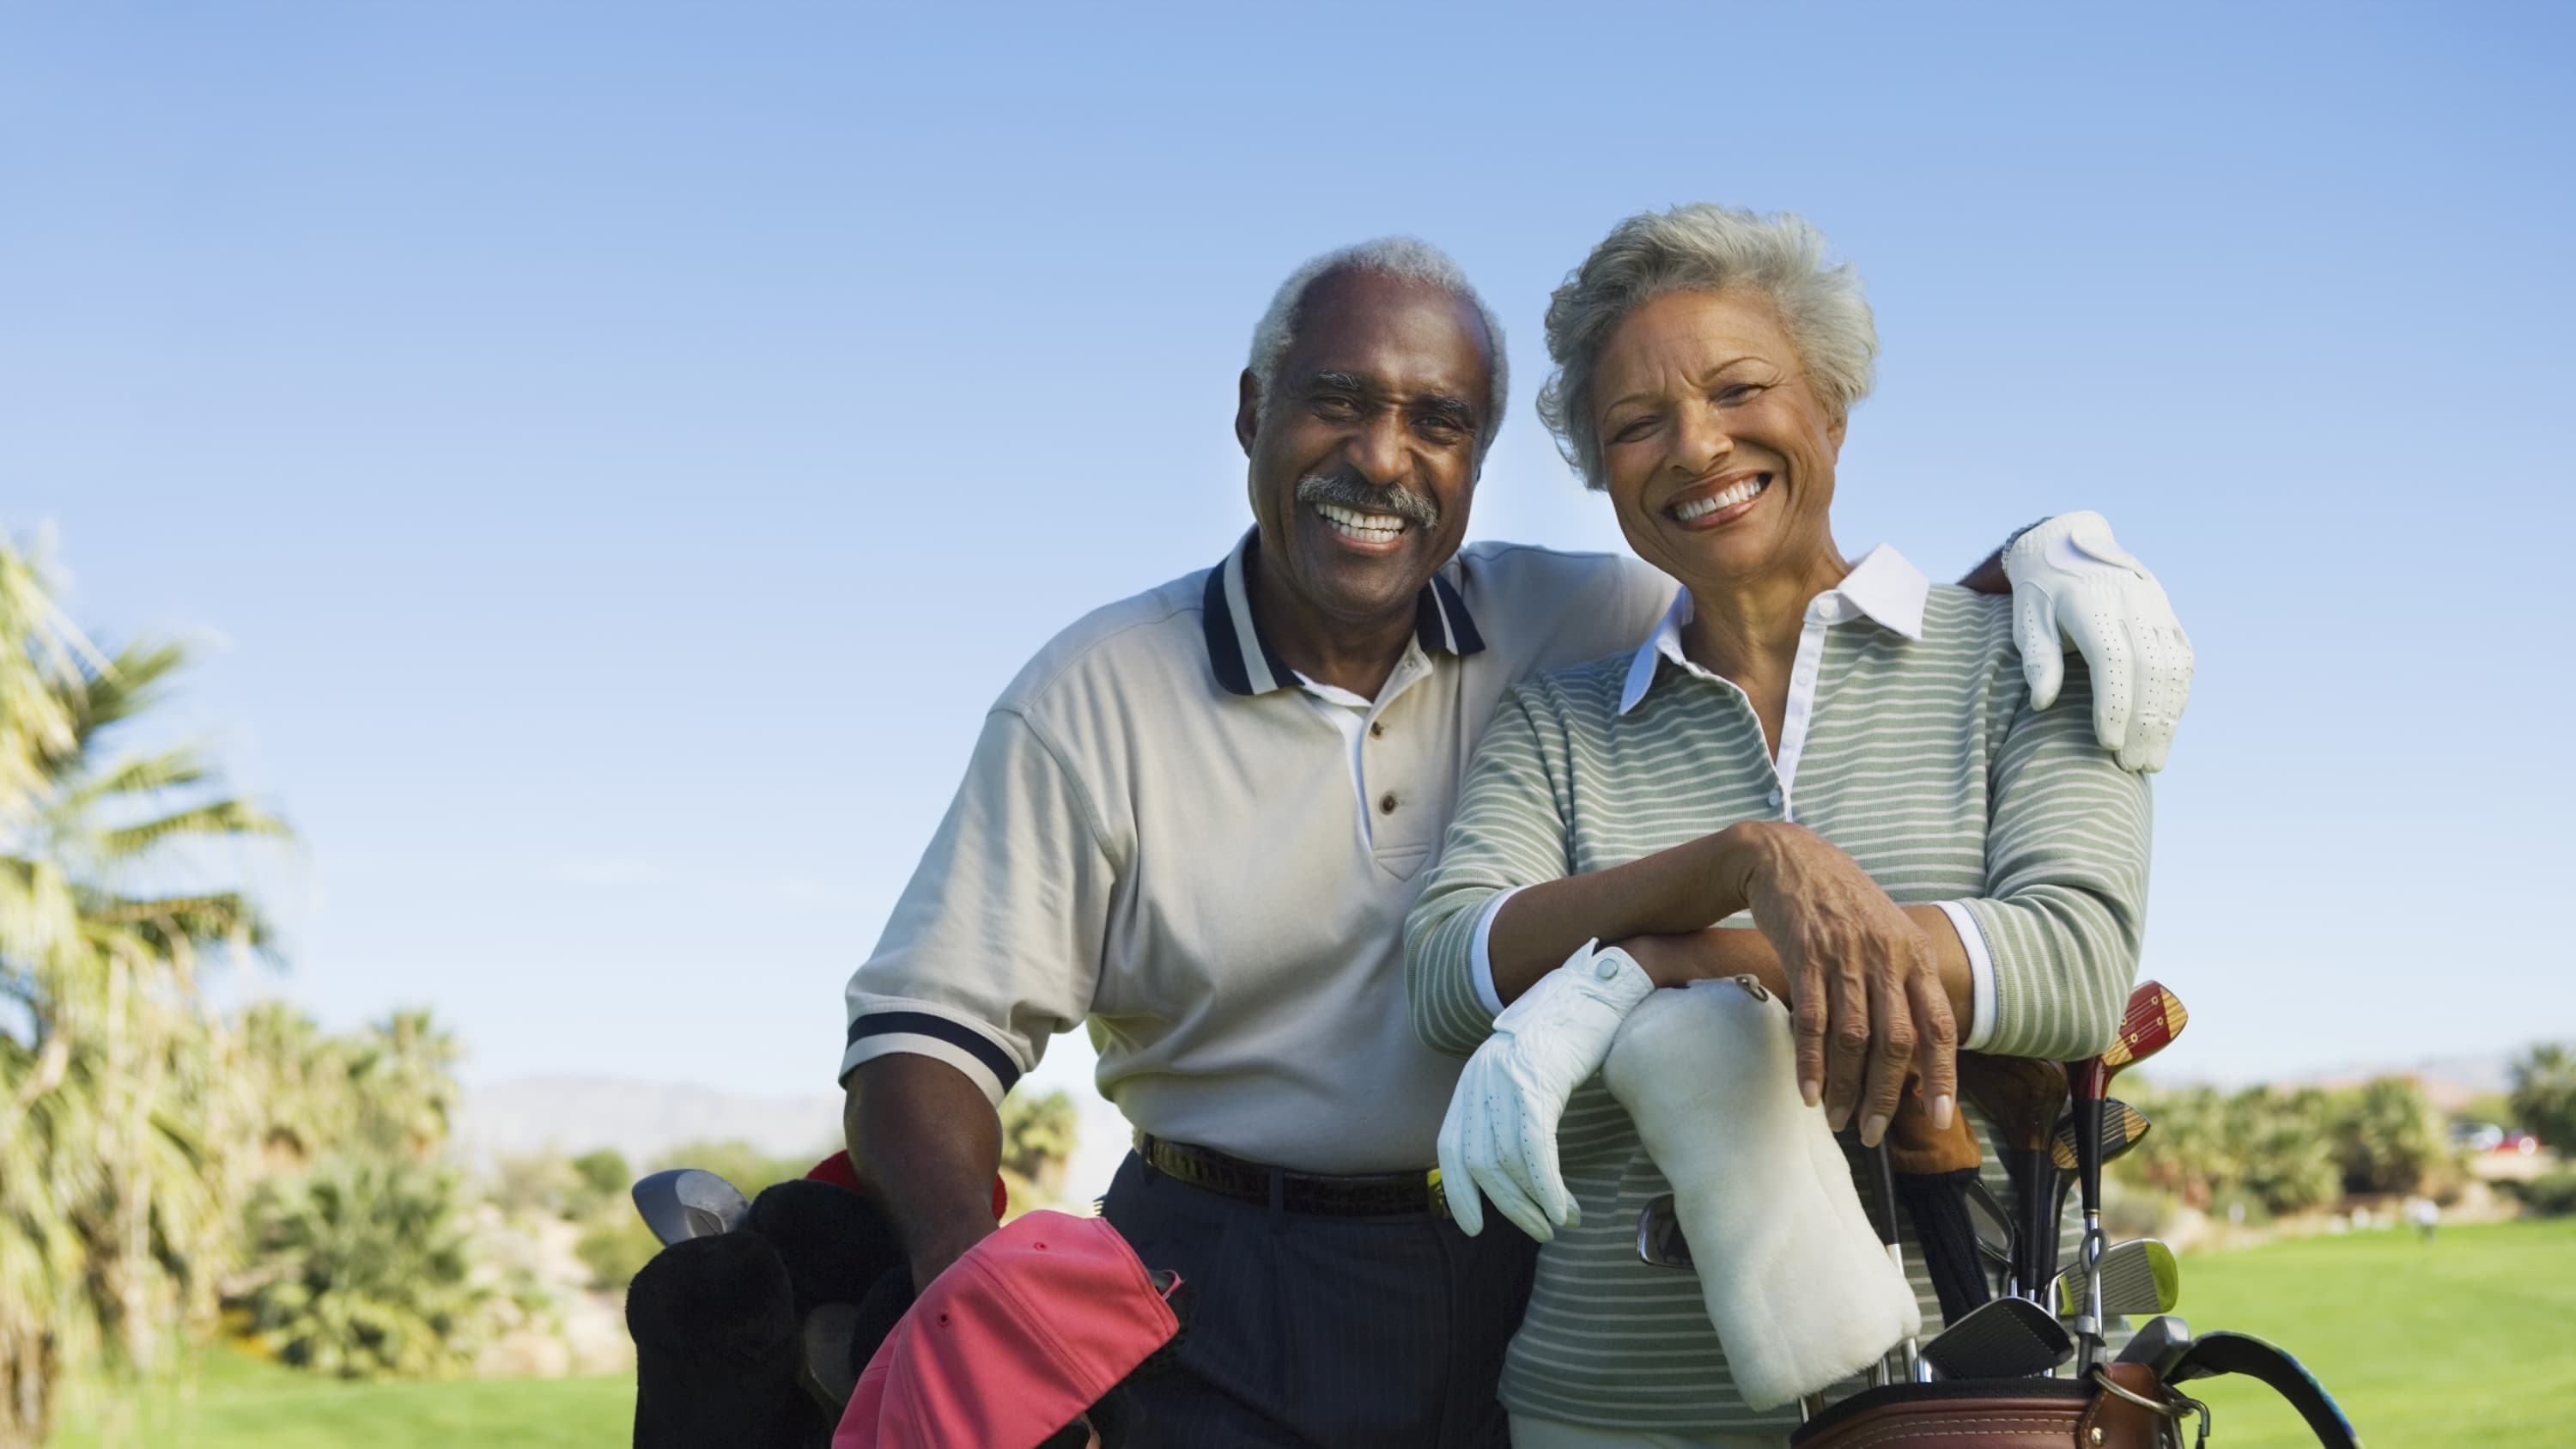 A couple playing golf, possibly after aortic aneurysm surgery